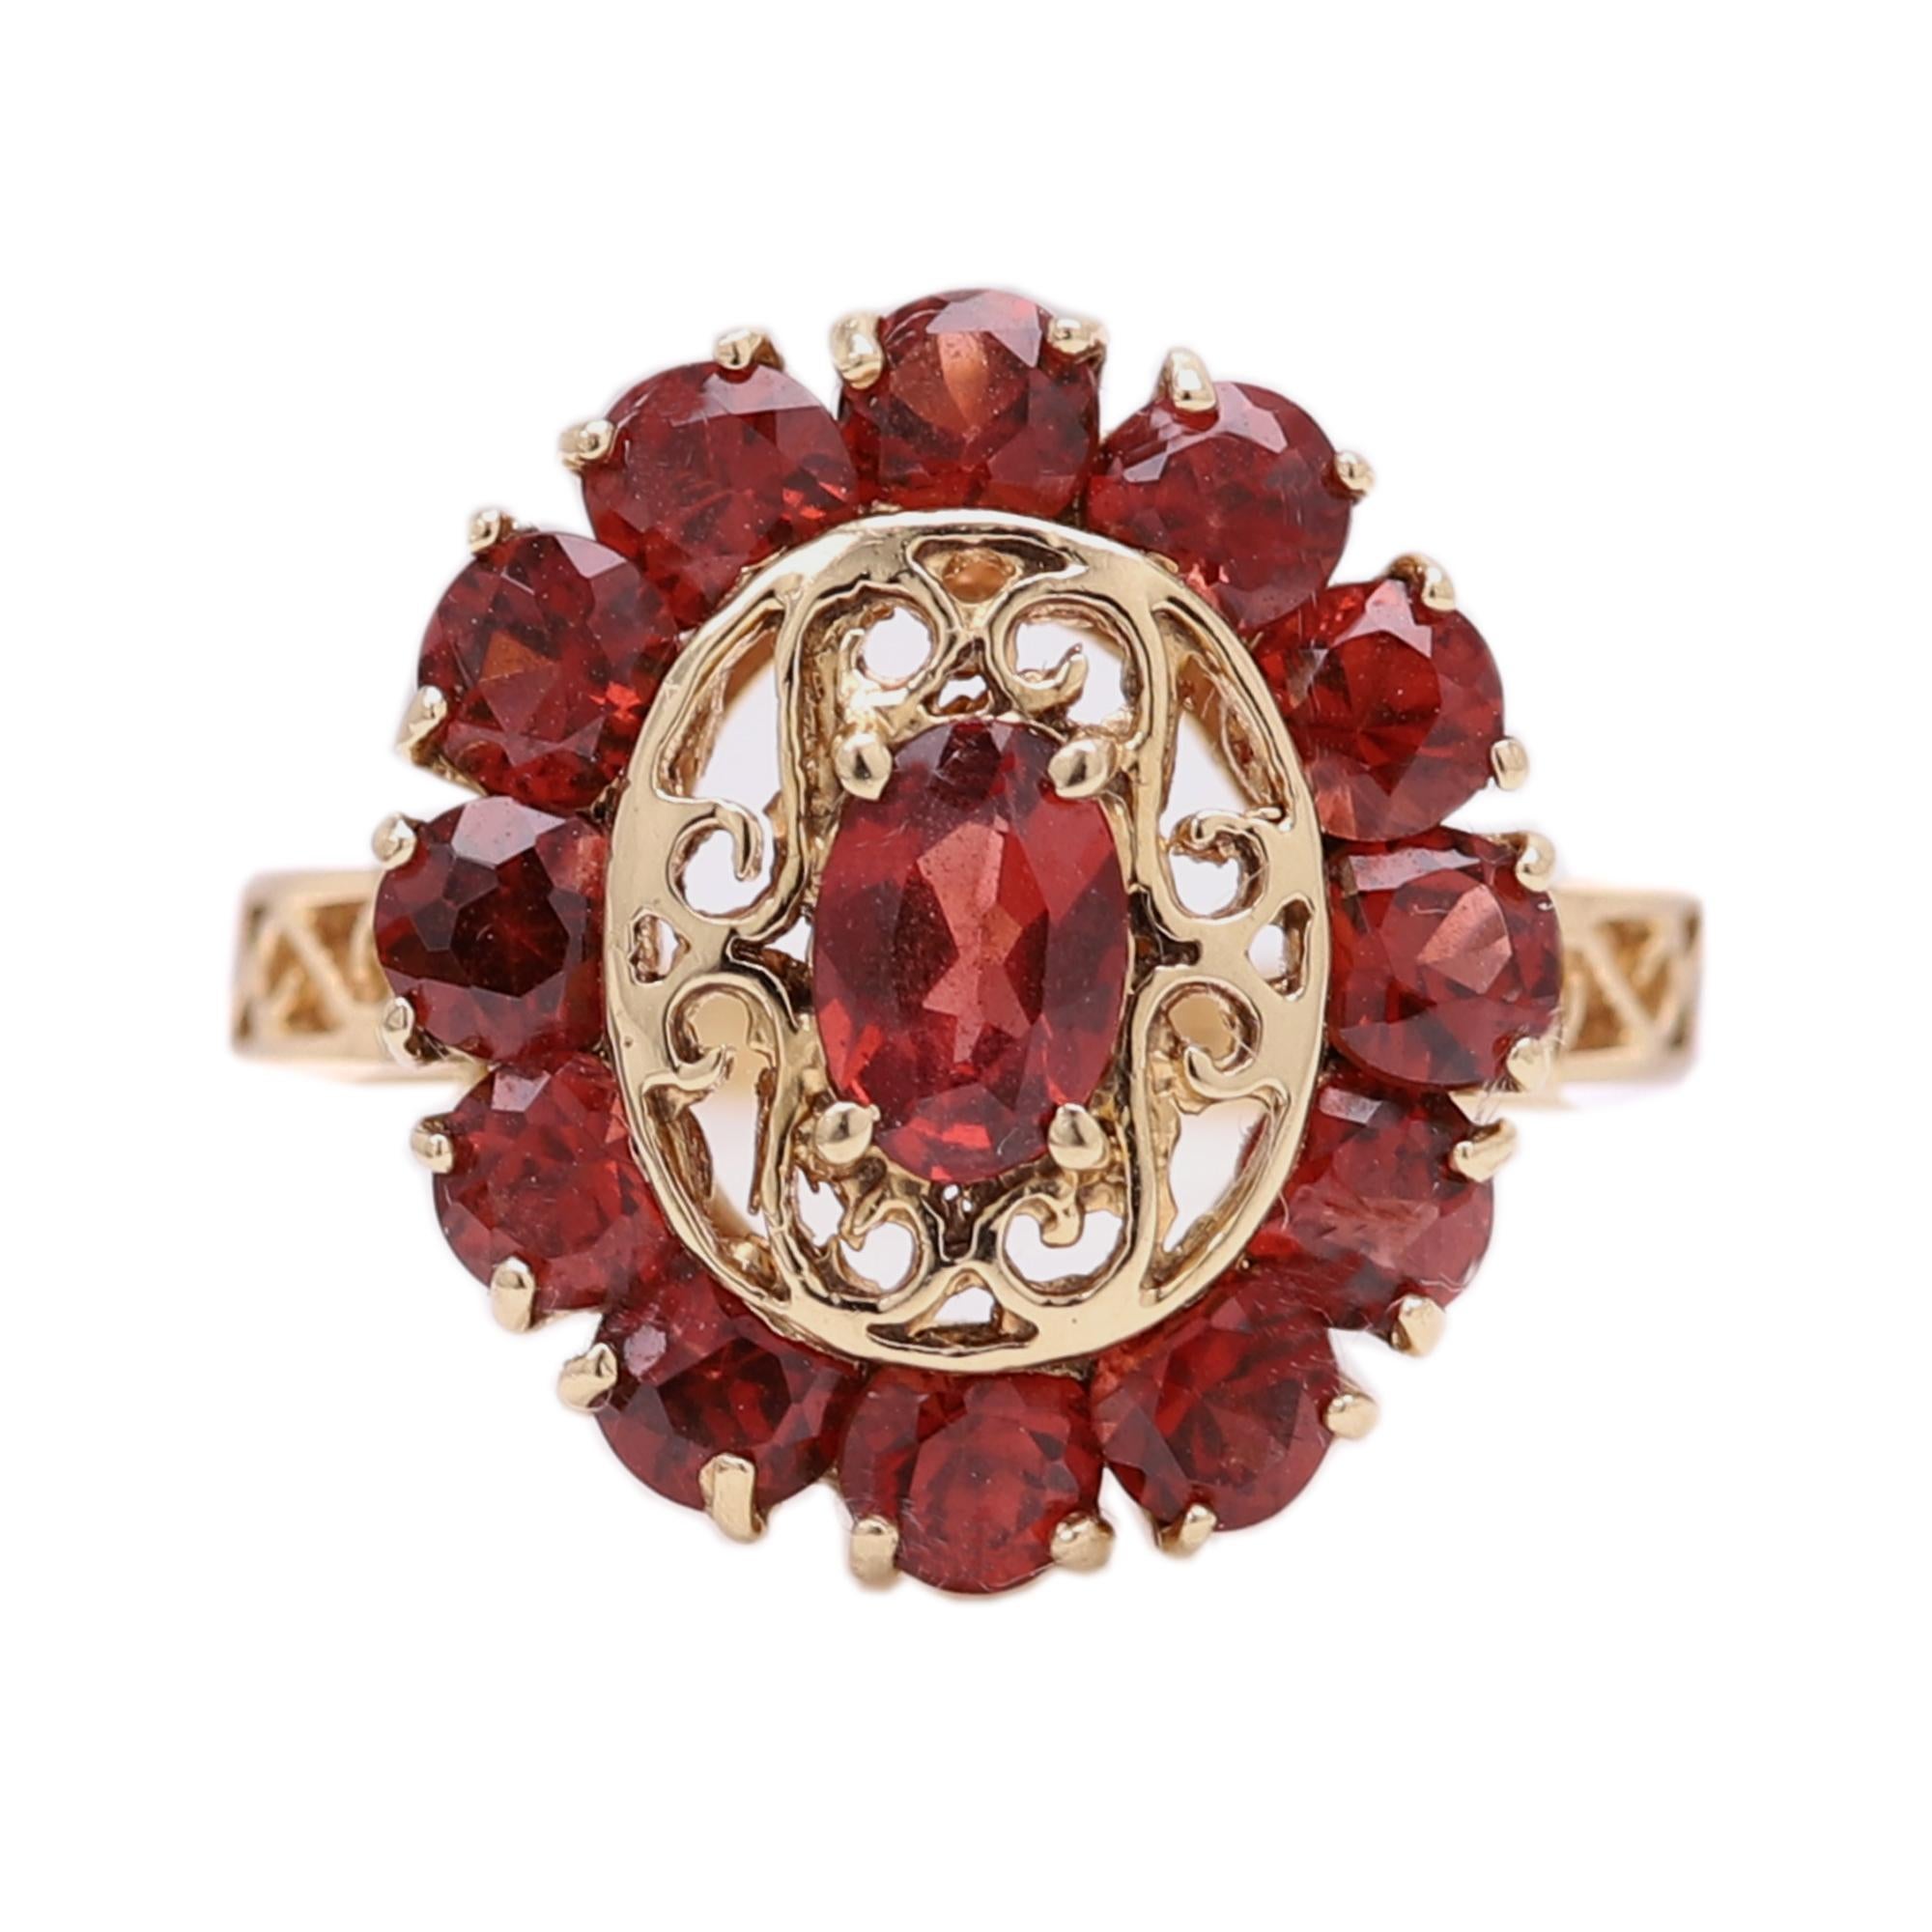 Vintage Cocktail Garnet Ring
Vibrant Brilliant colors of Natural Garnet.
The garnet gemstone tone is Orange-Red
overall size of the top area is 22 x 20 mm
Center Oval Garnet size is approx 7x5 mm
14k yellow gold  3.80 grams
Finger size 7
circa